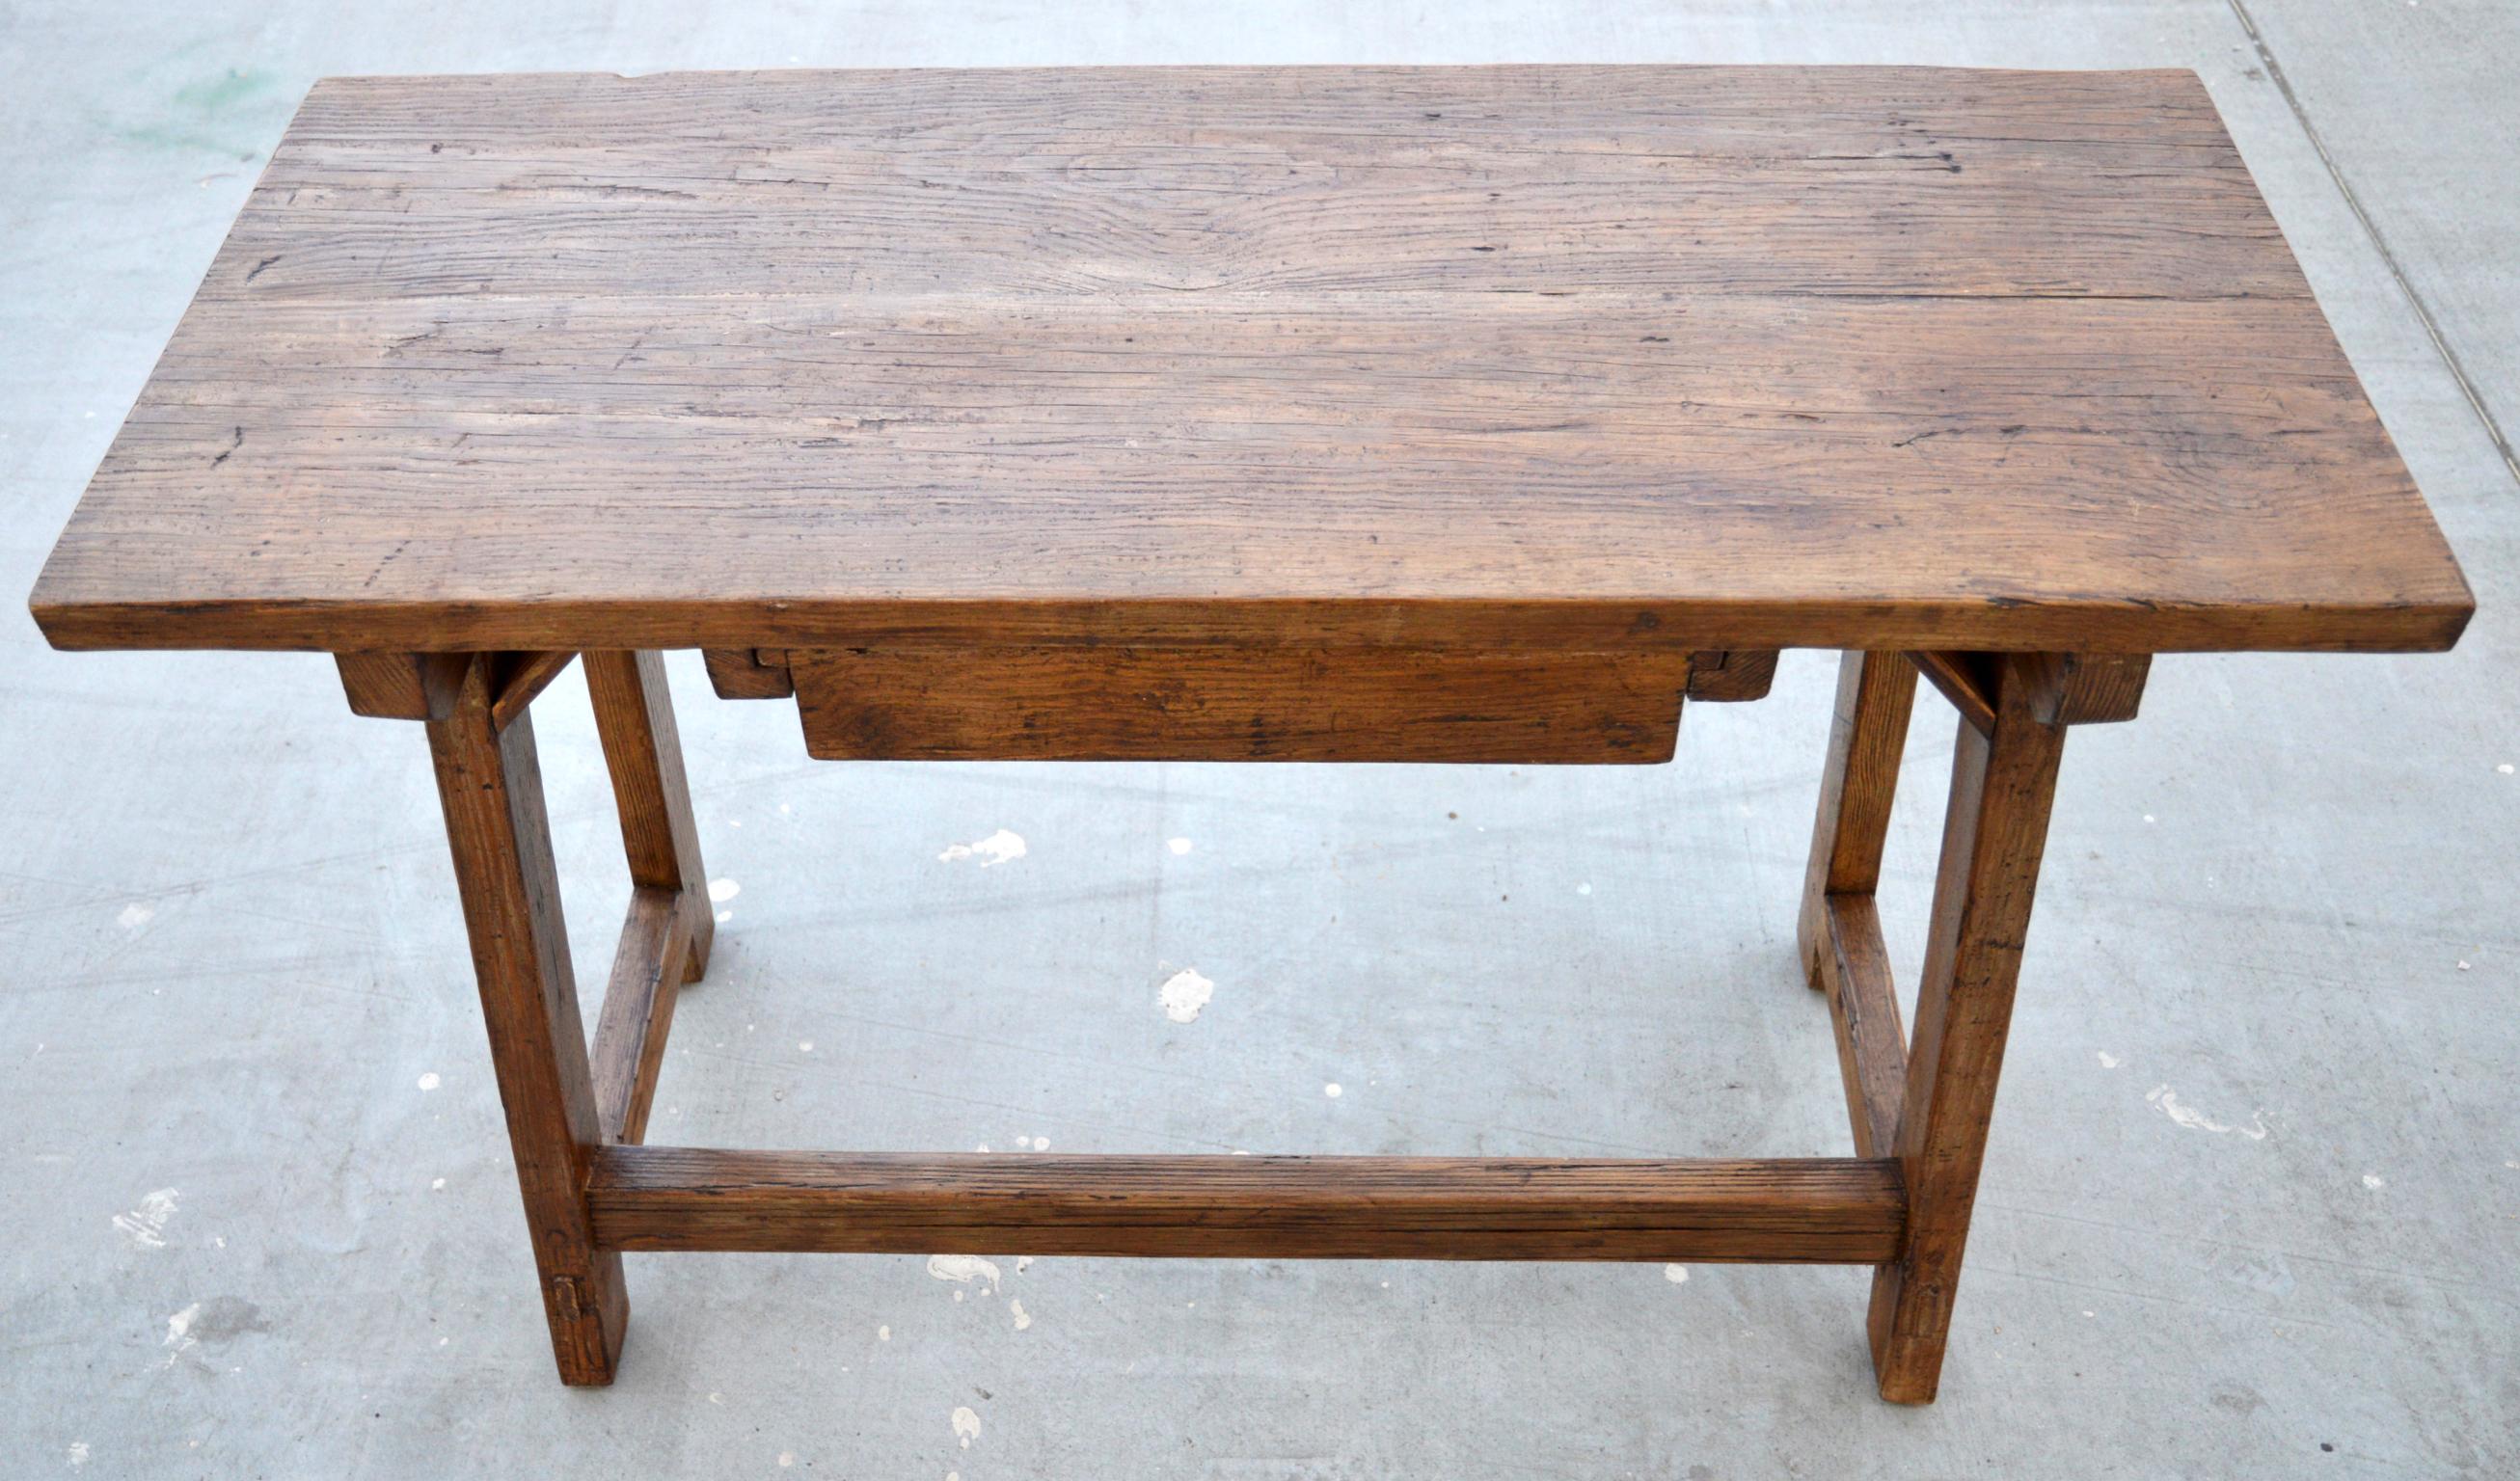 English Custom Desk or Writing Table Made from Reclaimed Pine